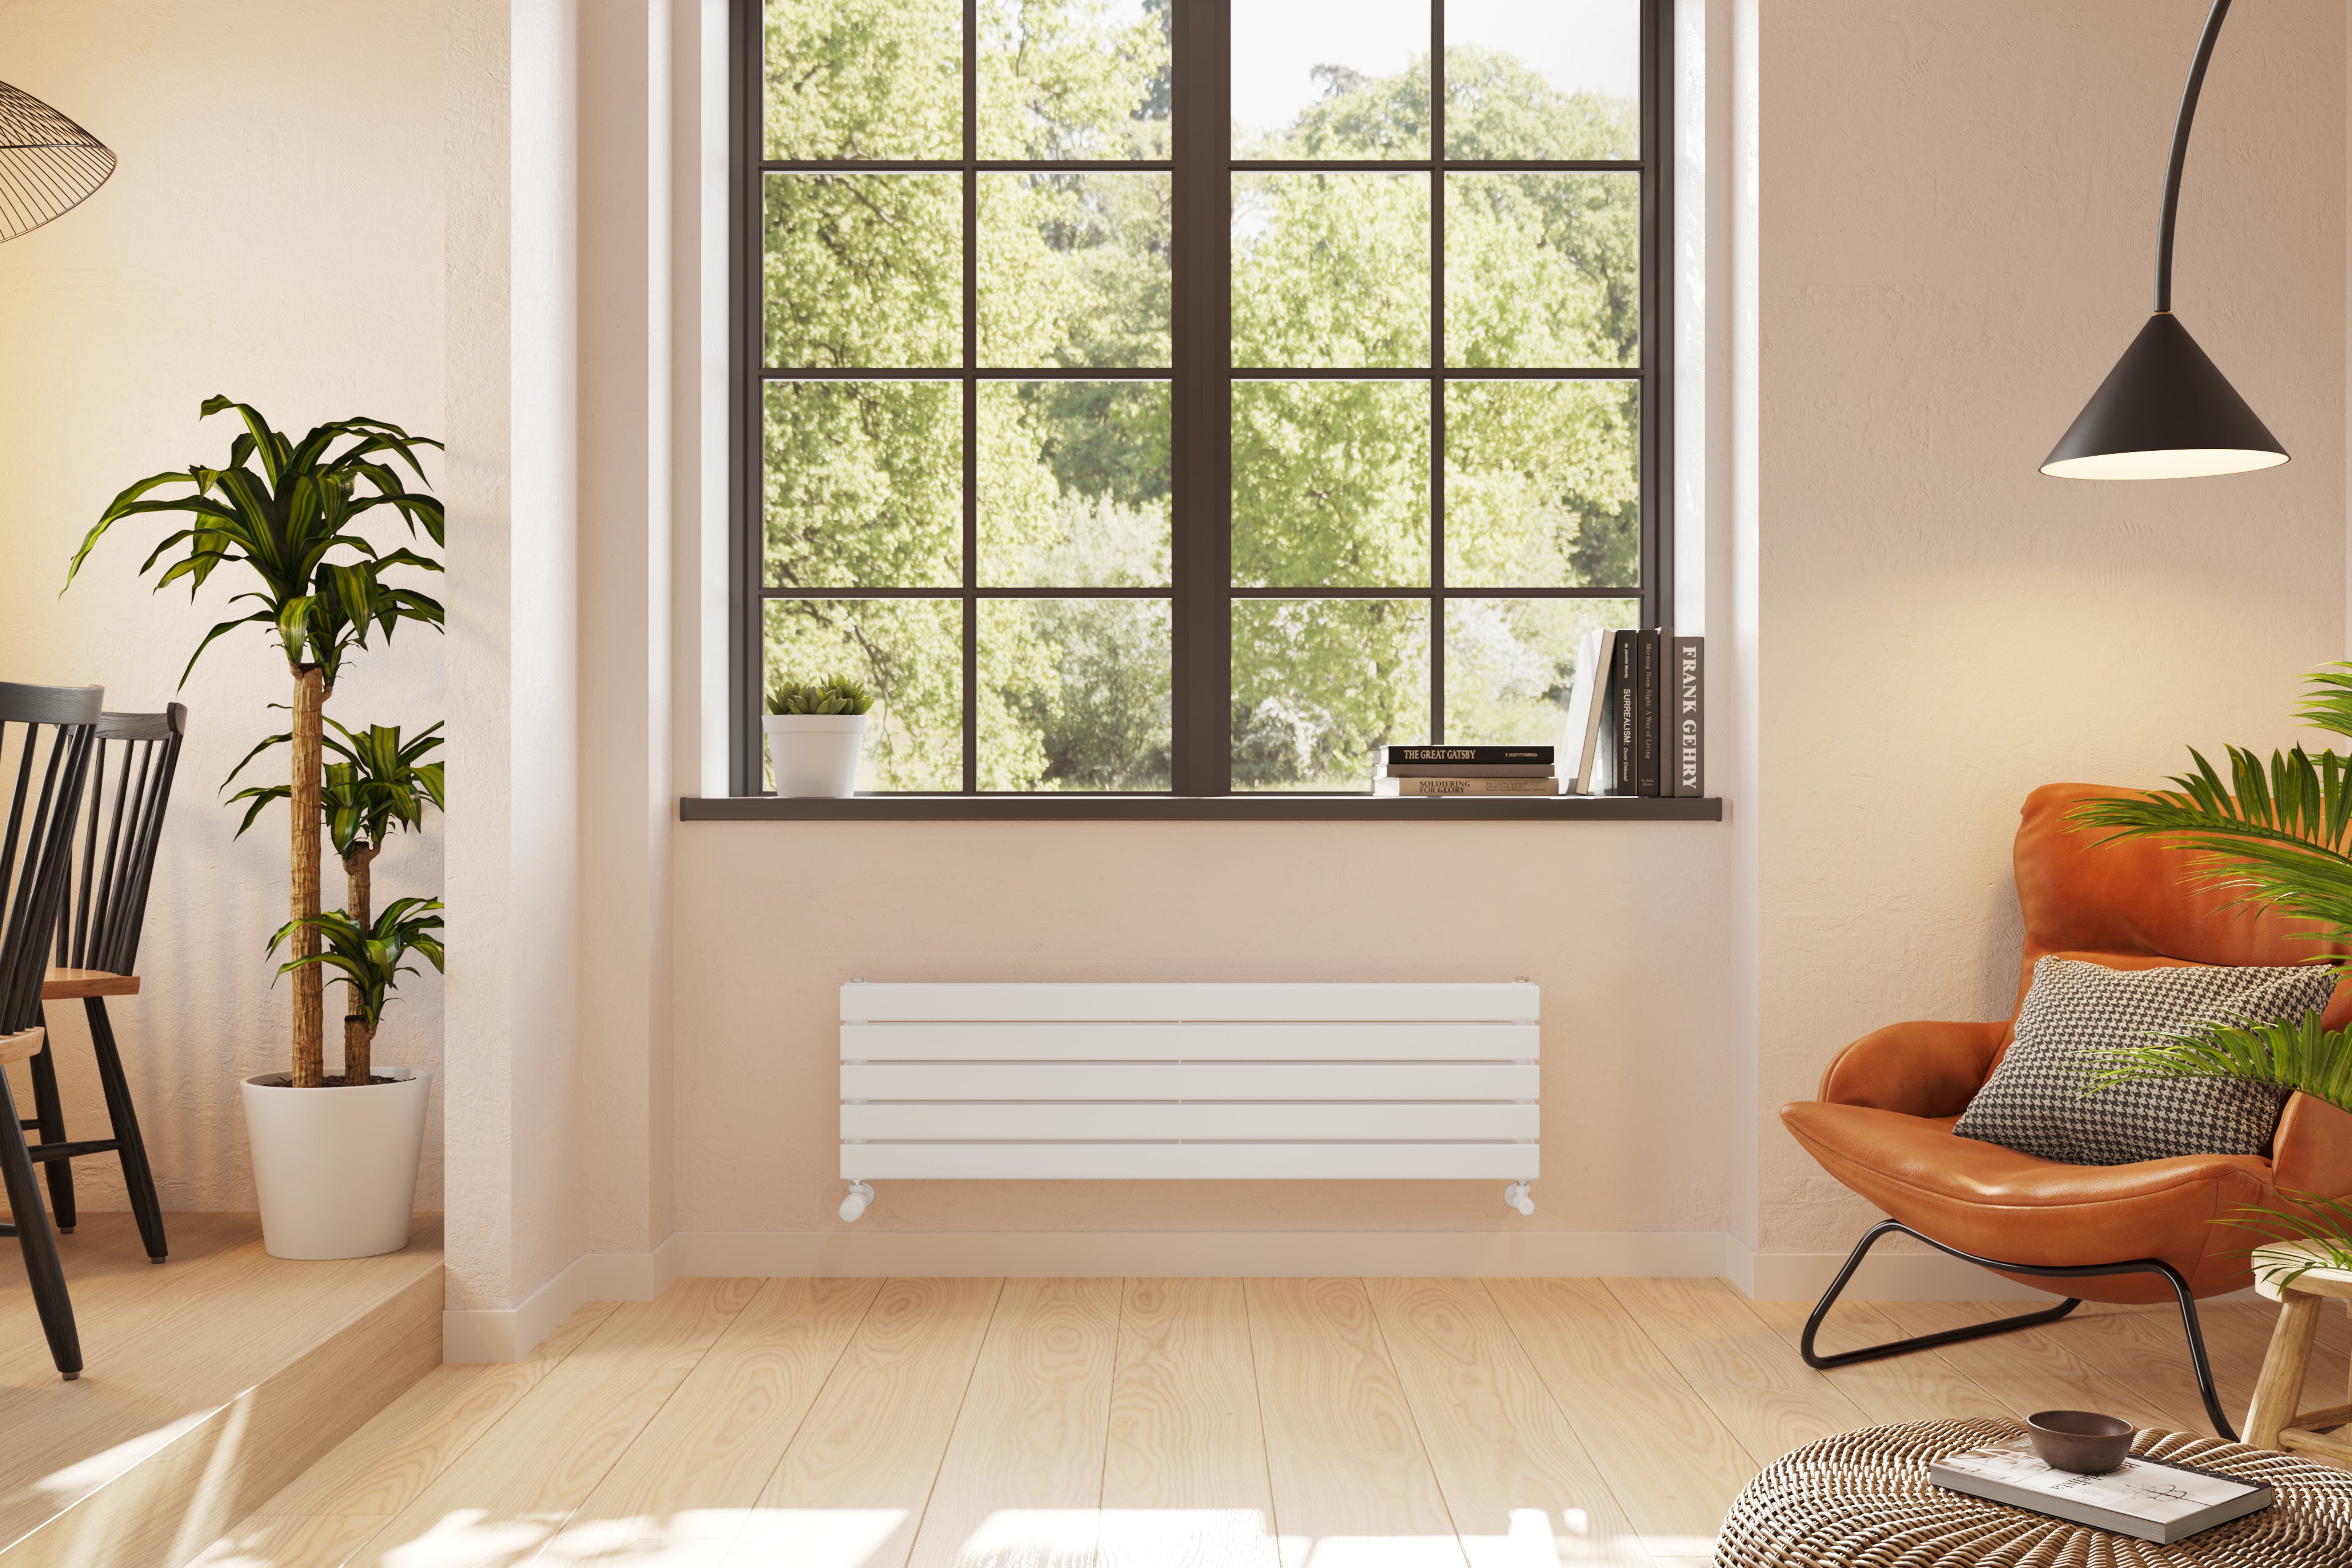 A matt white, horizontal, 2-panel radiator on a soft pink wall in a Scandi-inspired living room, beneath a window. Plants and trendy furniture.